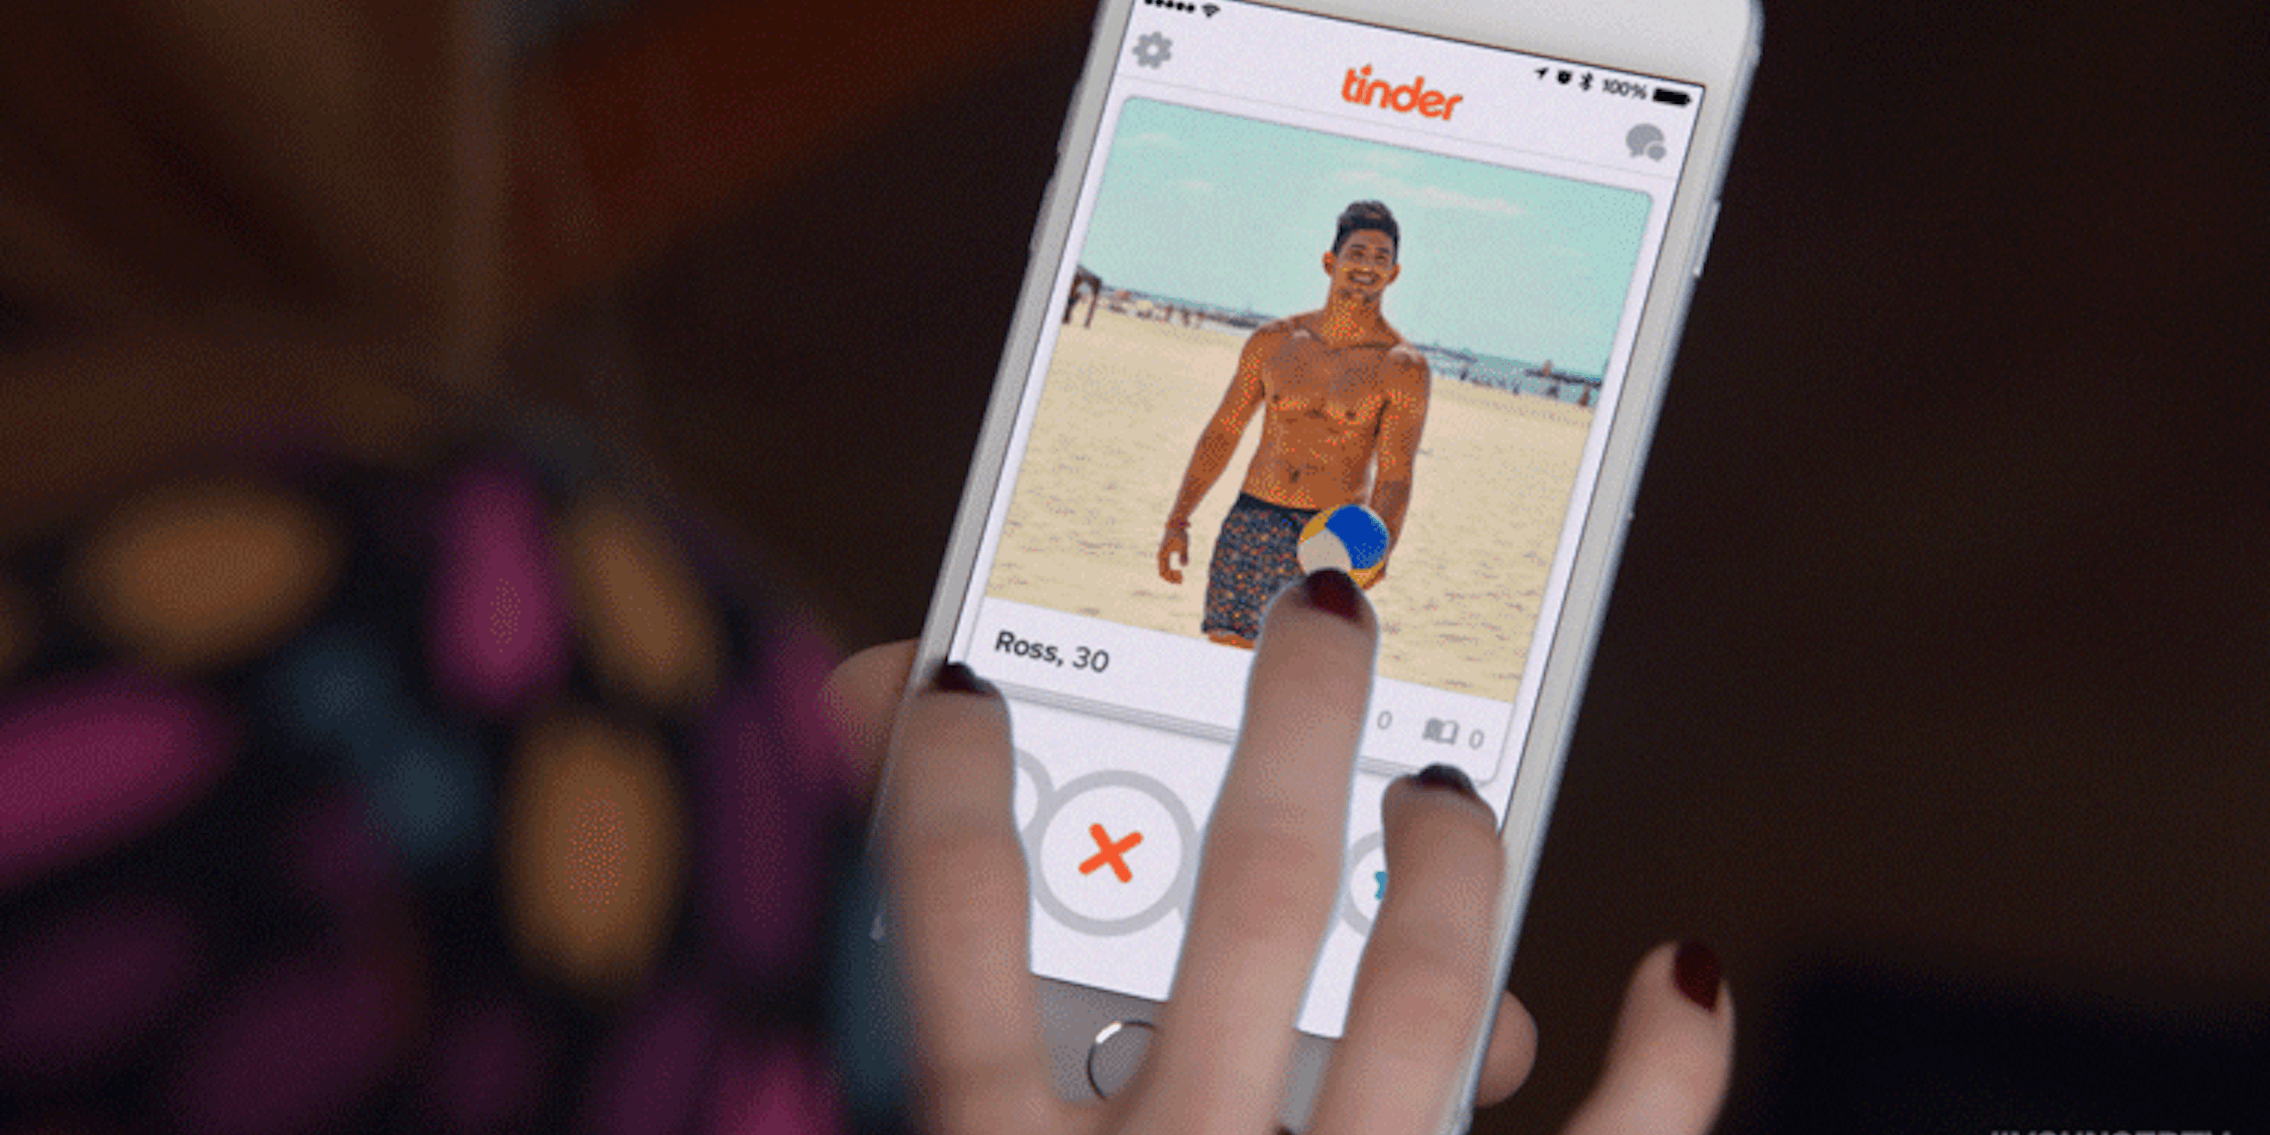 What to do when bored: swipe on Tinder